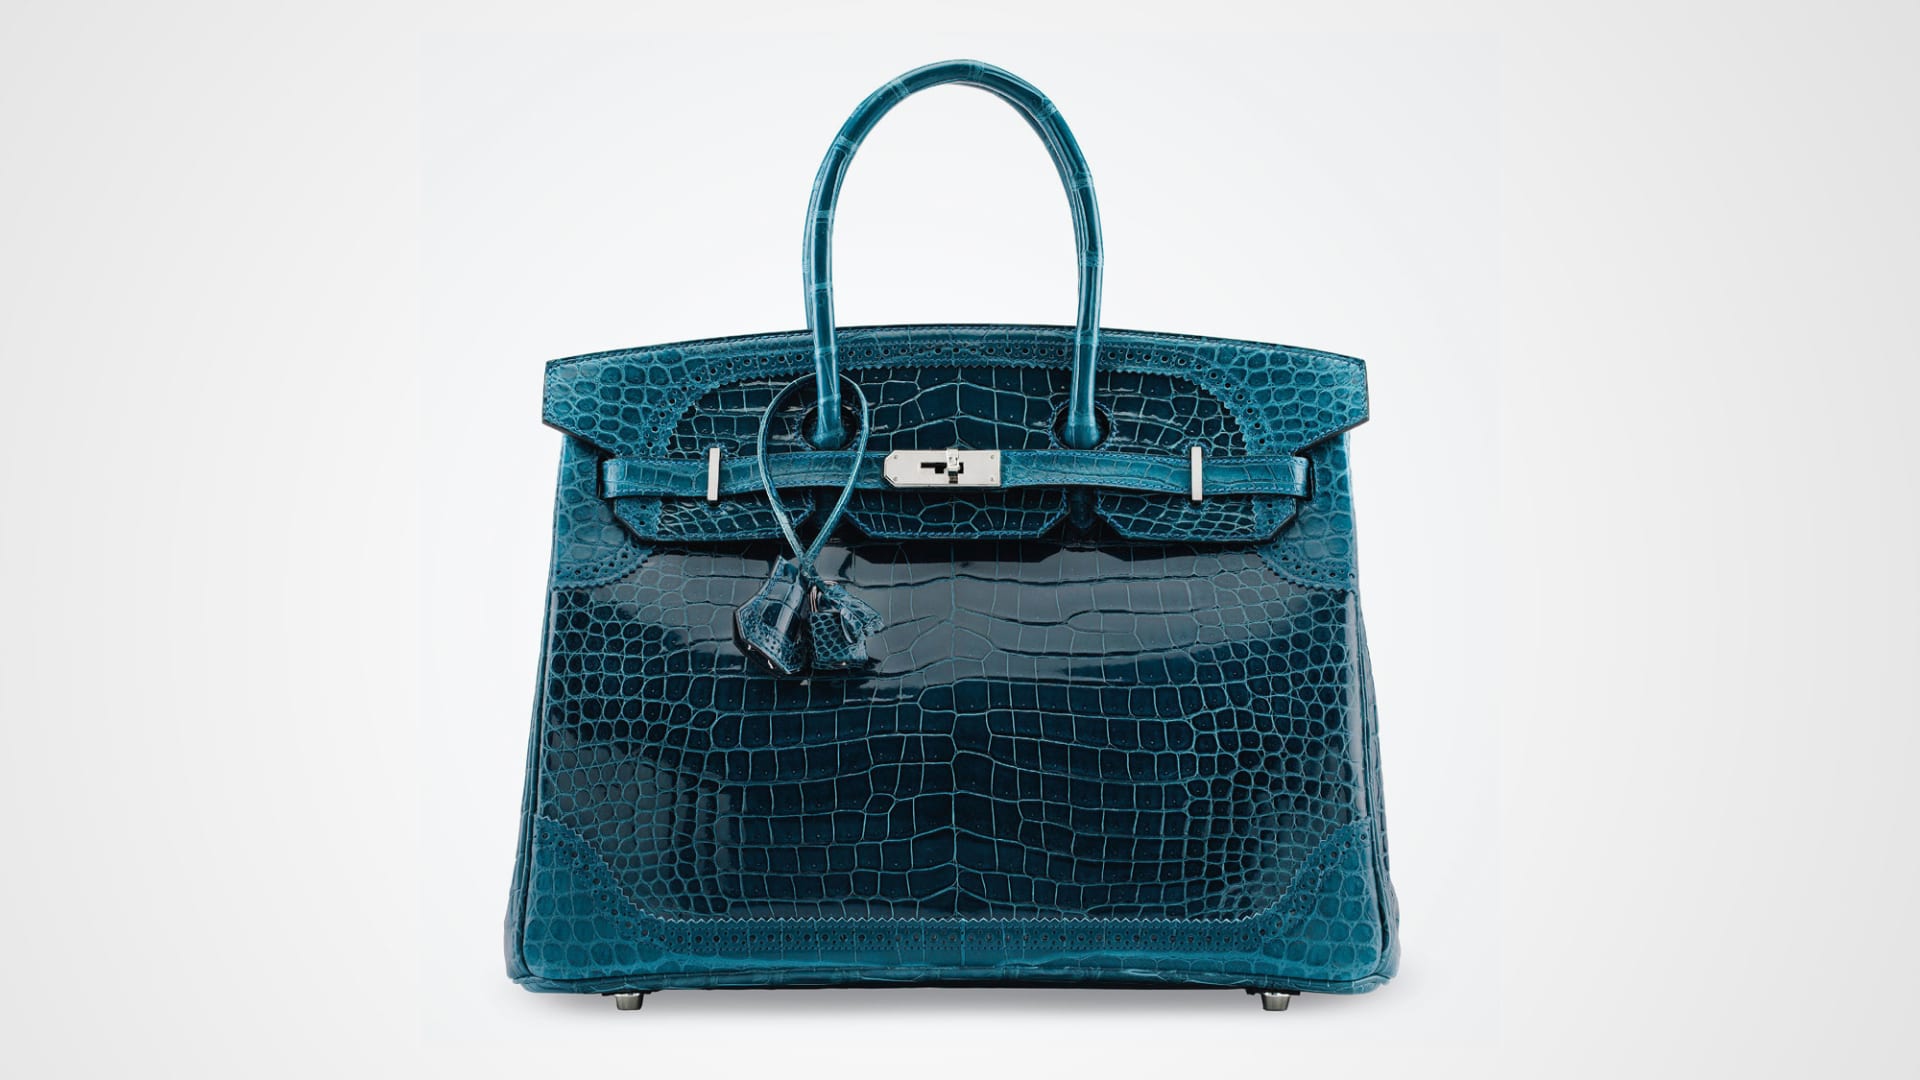 Hermès Birkin handbag expected to sell for over $50,000 at Christie's